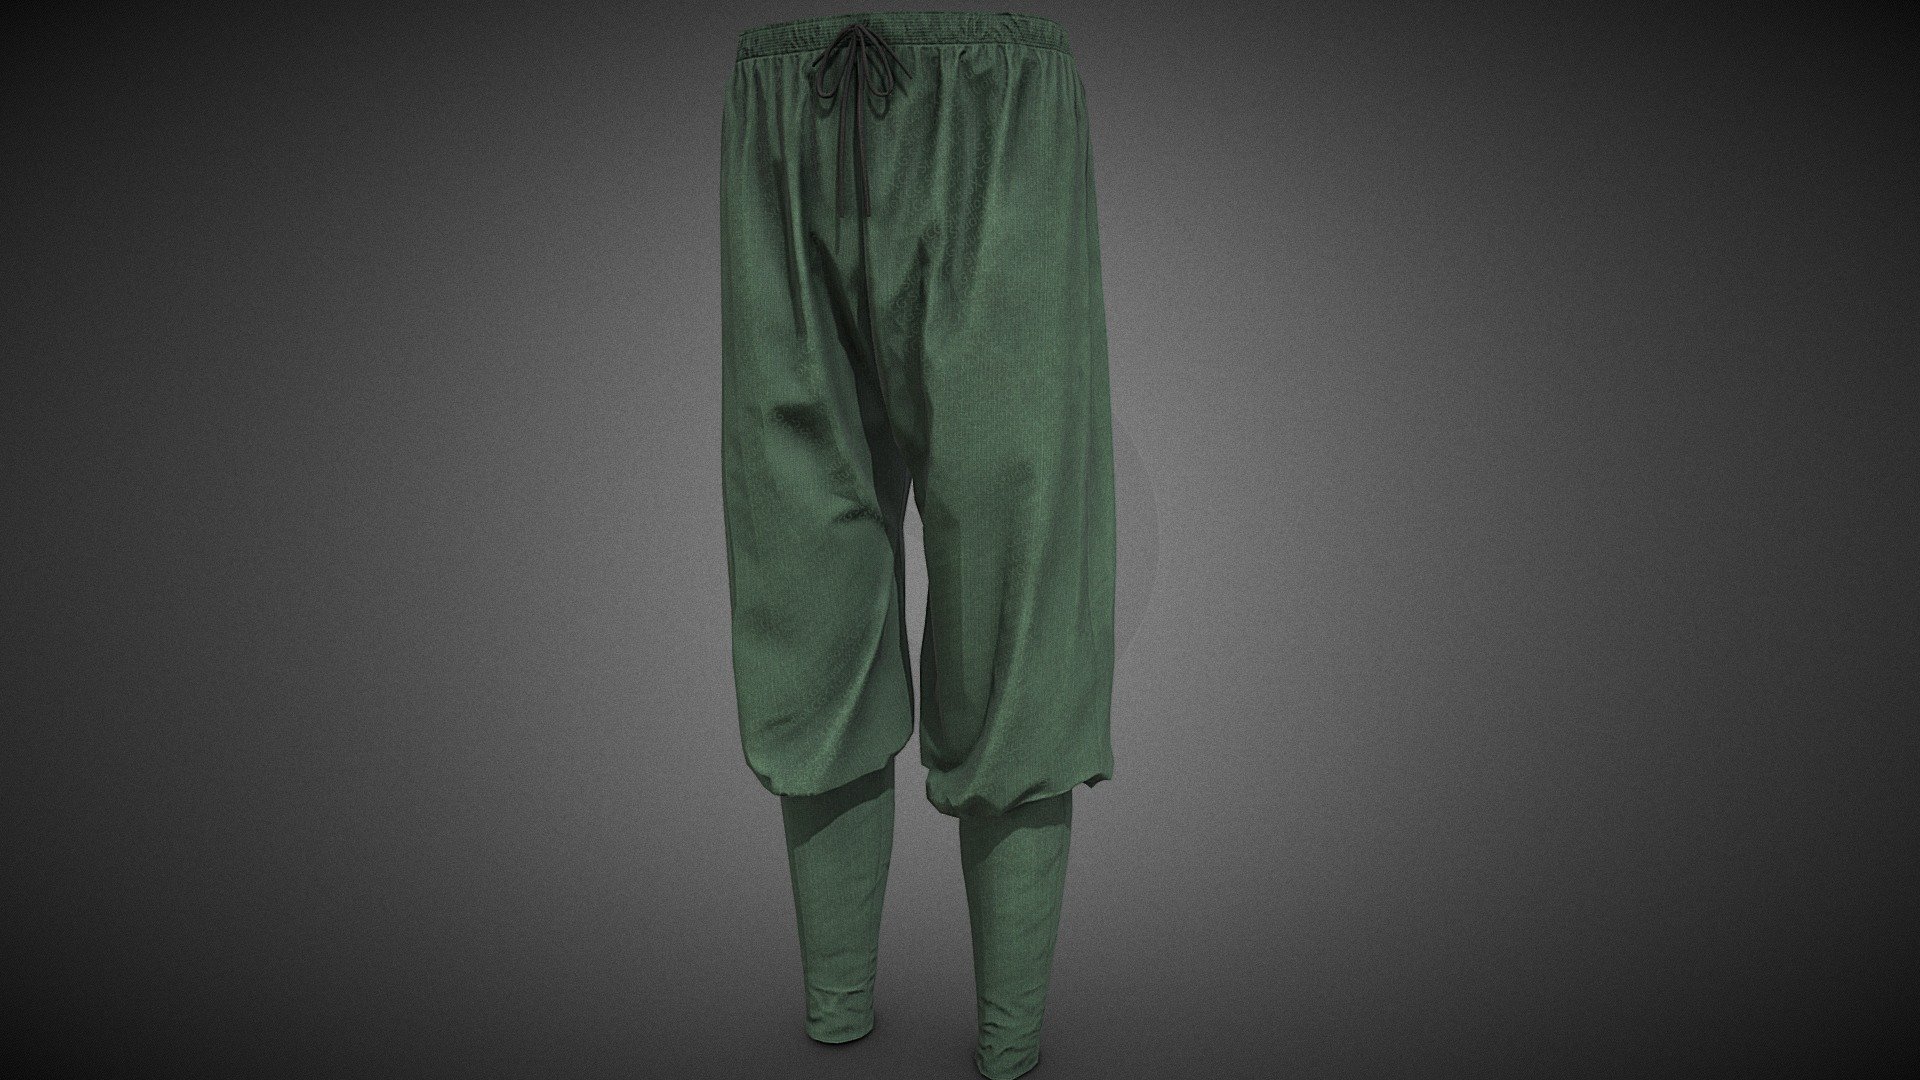 CG StudioX Present :
Green Medieval Pants Lowpoly/PBR




This is Green Medieval Pants Comes with Specular and Metalness PBR.

The photo been rendered using Marmoset Toolbag 4 (real time game engine )


Features :



Comes with Specular and Metalness PBR 4K texture .

Good topology.

Low polygon geometry.

The Model is prefect for game for both Specular workflow as in Unity and Metalness as in Unreal engine .

The model also rendered using Marmoset Toolbag 4 with both Specular and Metalness PBR and also included in the product with the full texture.

The texture can be easily adjustable .


Texture :



One set of UV [Albedo -Normal-Metalness -Roughness-Gloss-Specular-Ao] (4096*4096)


Files :
Marmoset Toolbag 4 ,Maya,,FBX,glTF,Blender,OBj with all the textures.




Contact me for if you have any questions.
 - Green Medieval Pants - Buy Royalty Free 3D model by CG StudioX (@CG_StudioX) 3d model